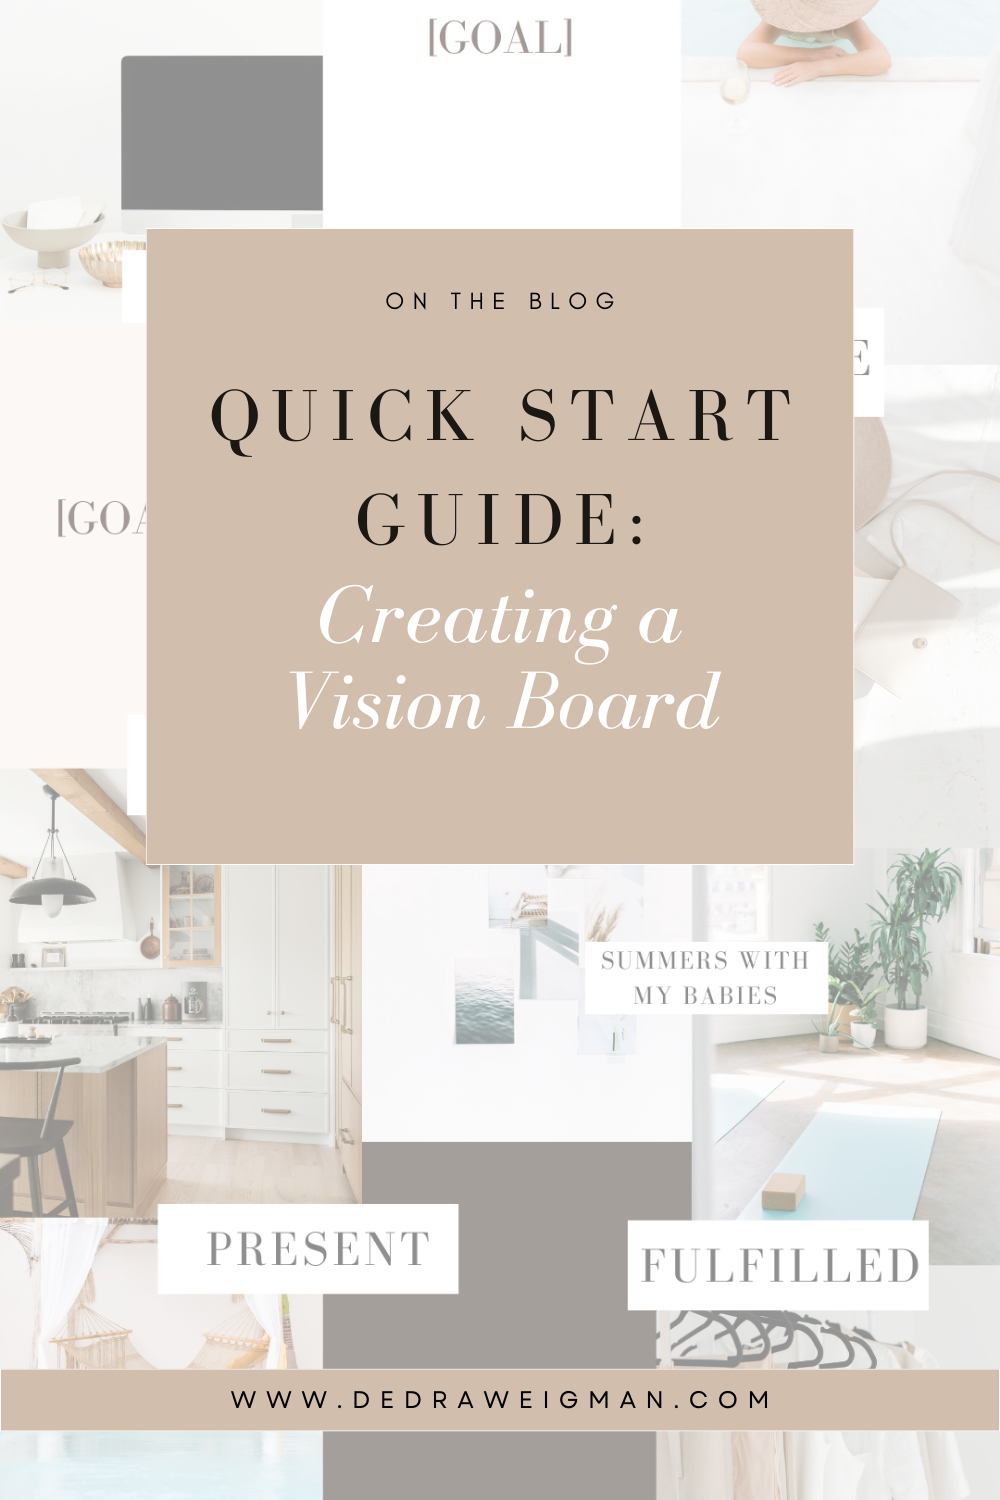 Step By Step Process To Creating The Best Vision Boards - Afam